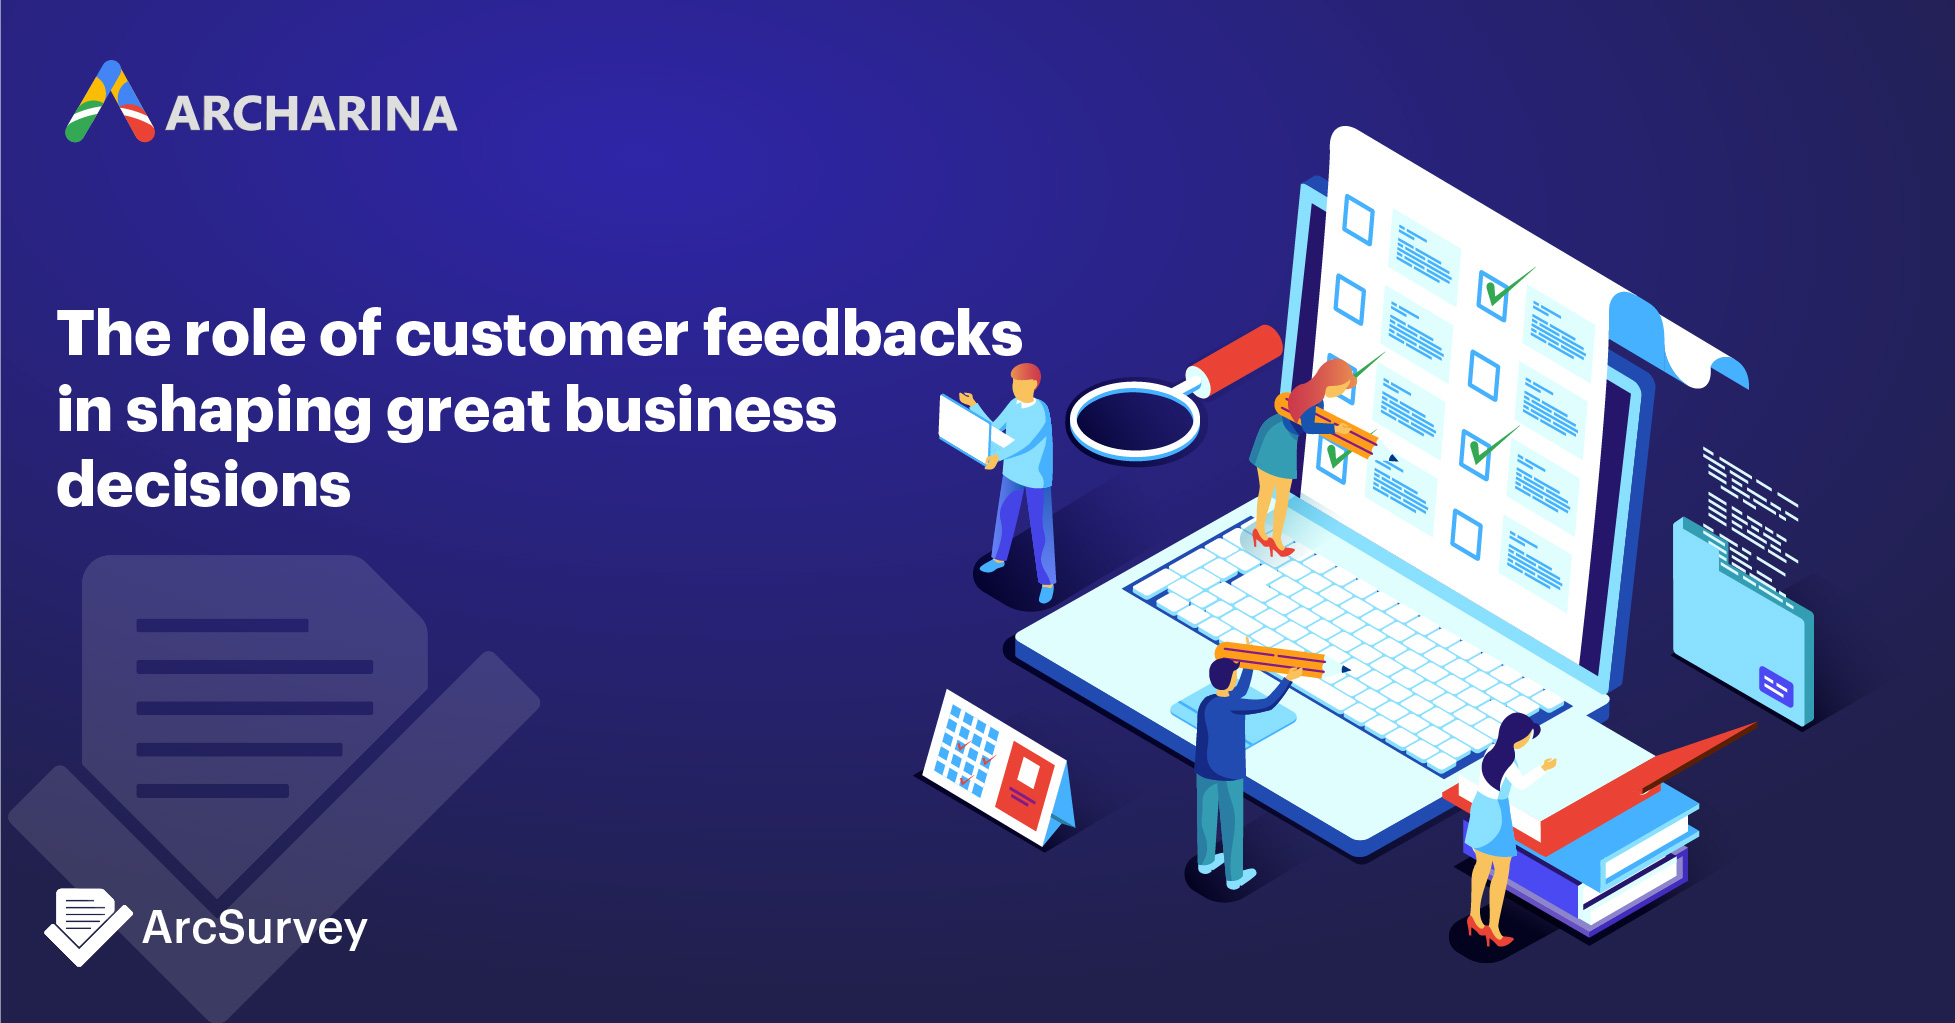 The role of customer feedbacks in shaping great business decisions